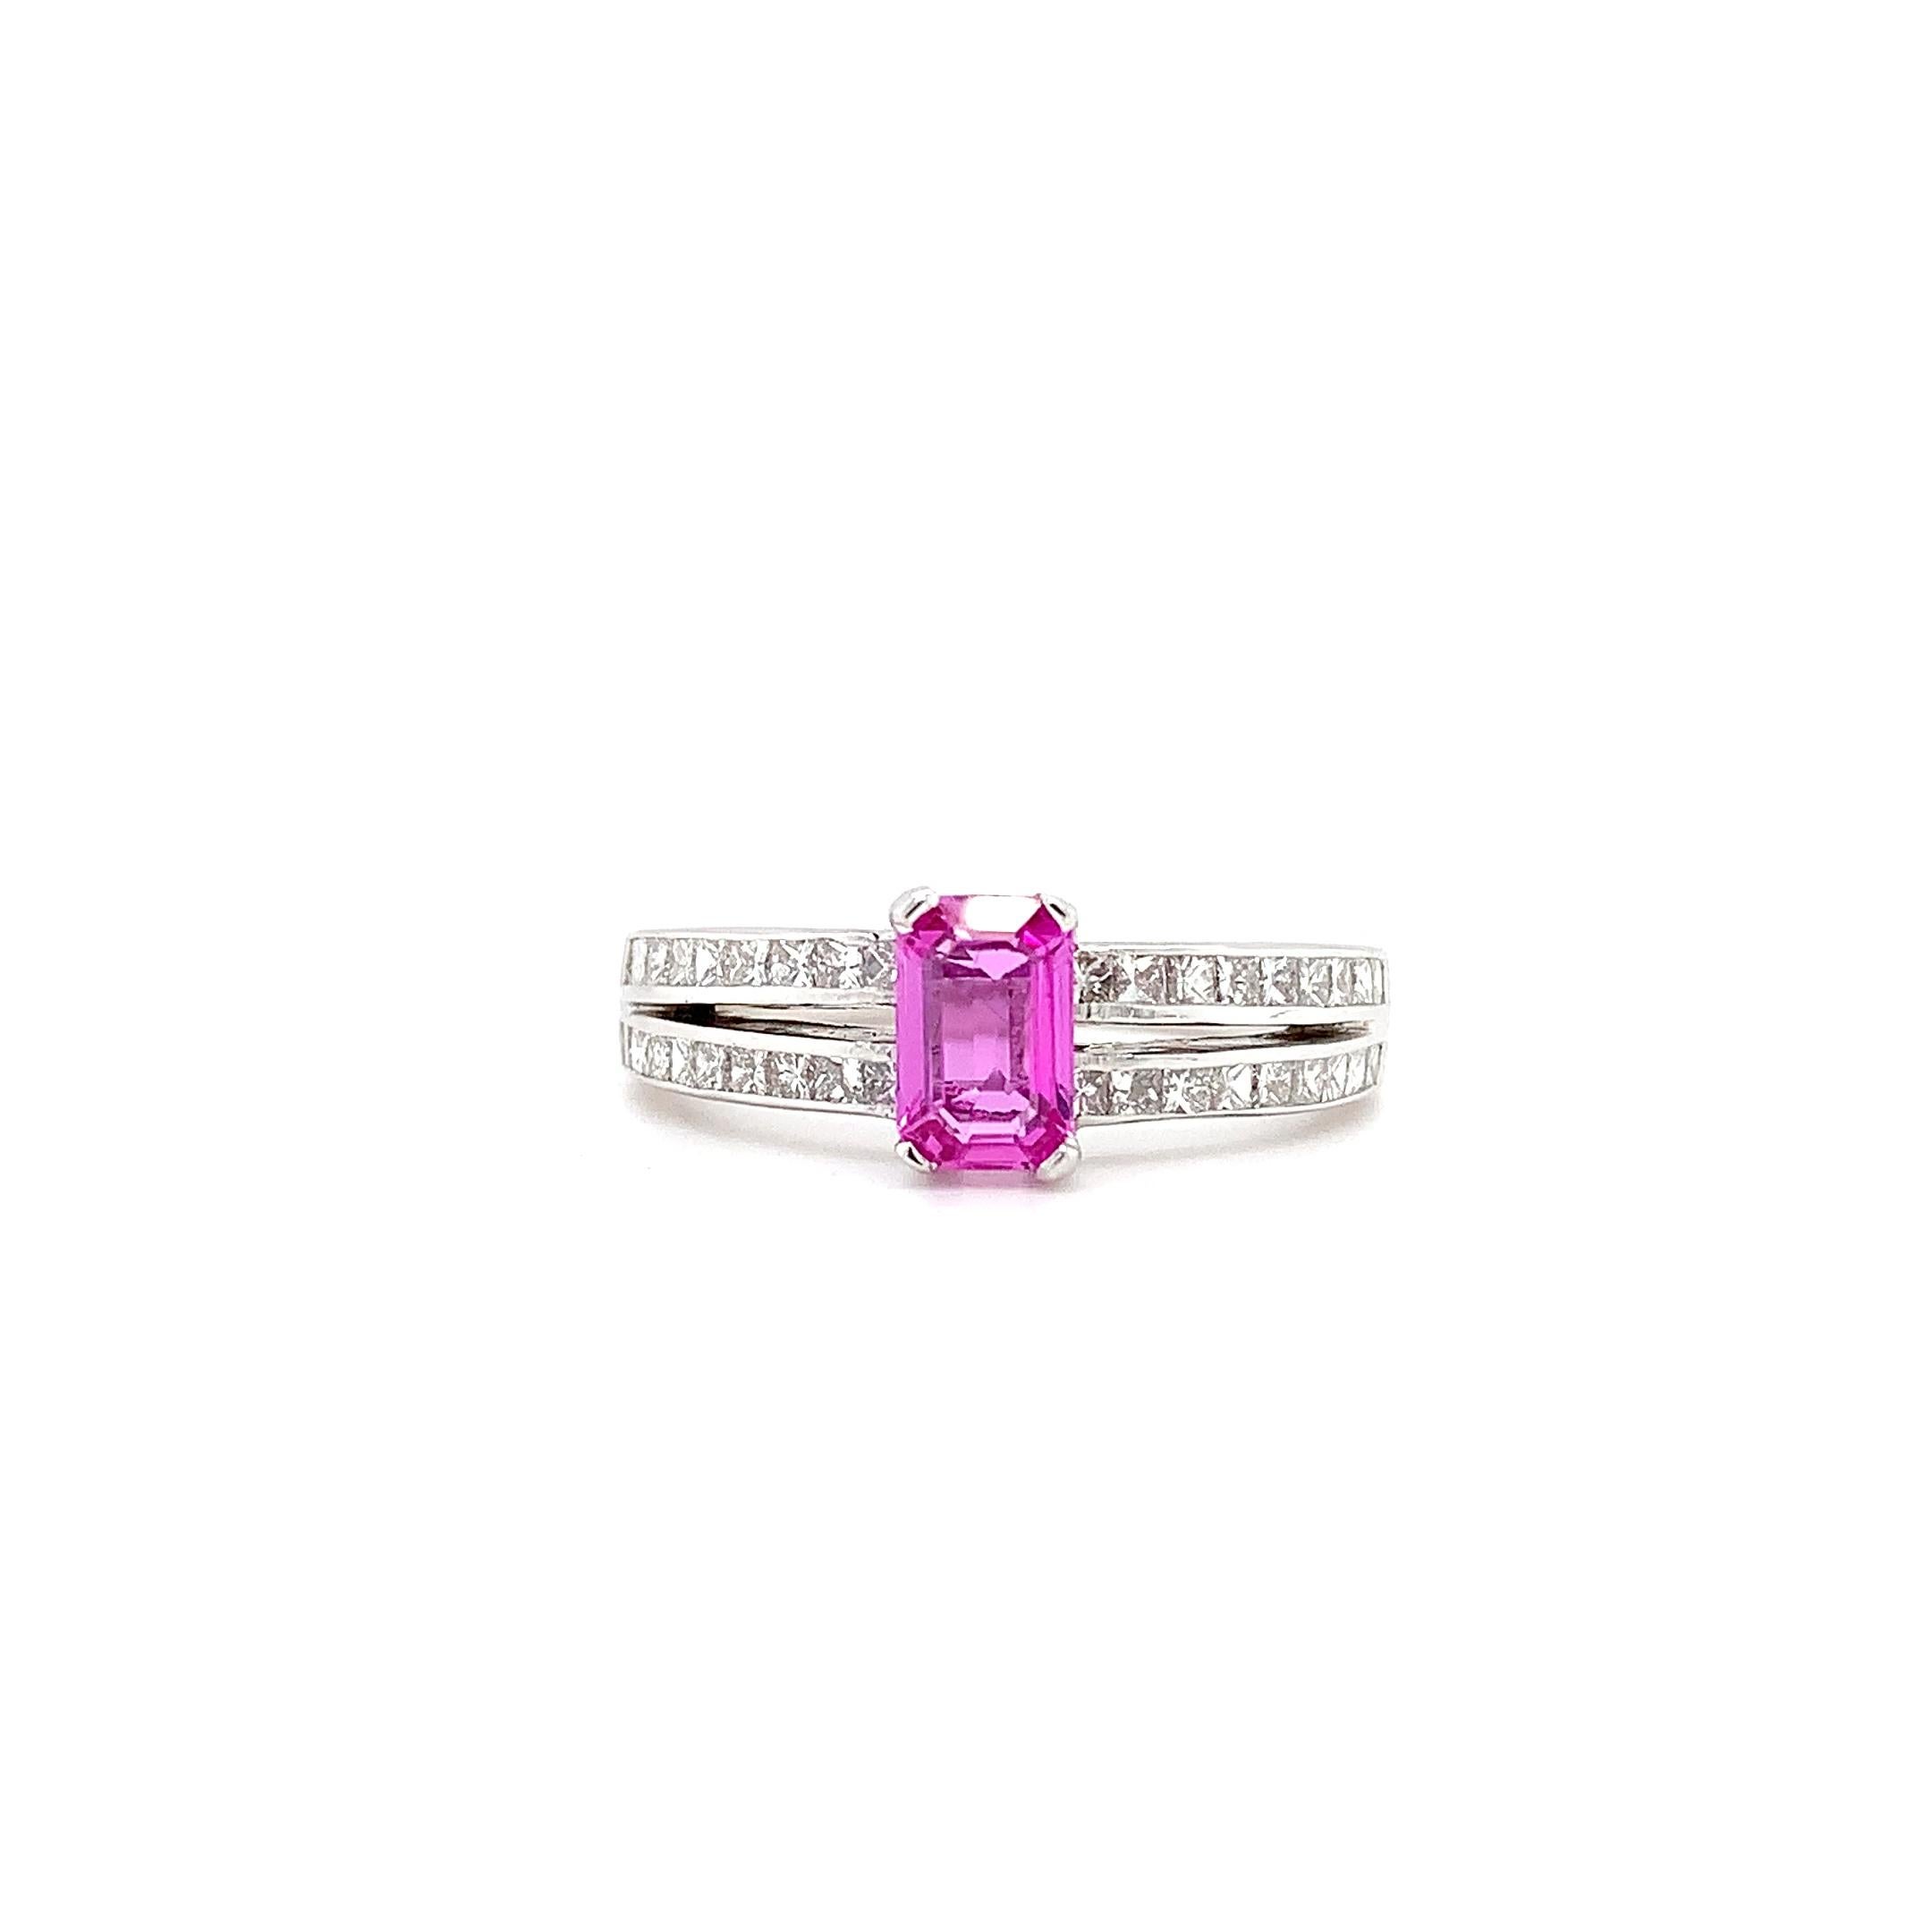 Pink sapphire and diamond solitaire engagement ring 18ct white gold
1.50ct Pink sapphire and diamond double band engagement ring in 18ct white gold.
Pink sapphire emerald cut natural gemstone total weight 0.70ct 
Round diamond cut total weight